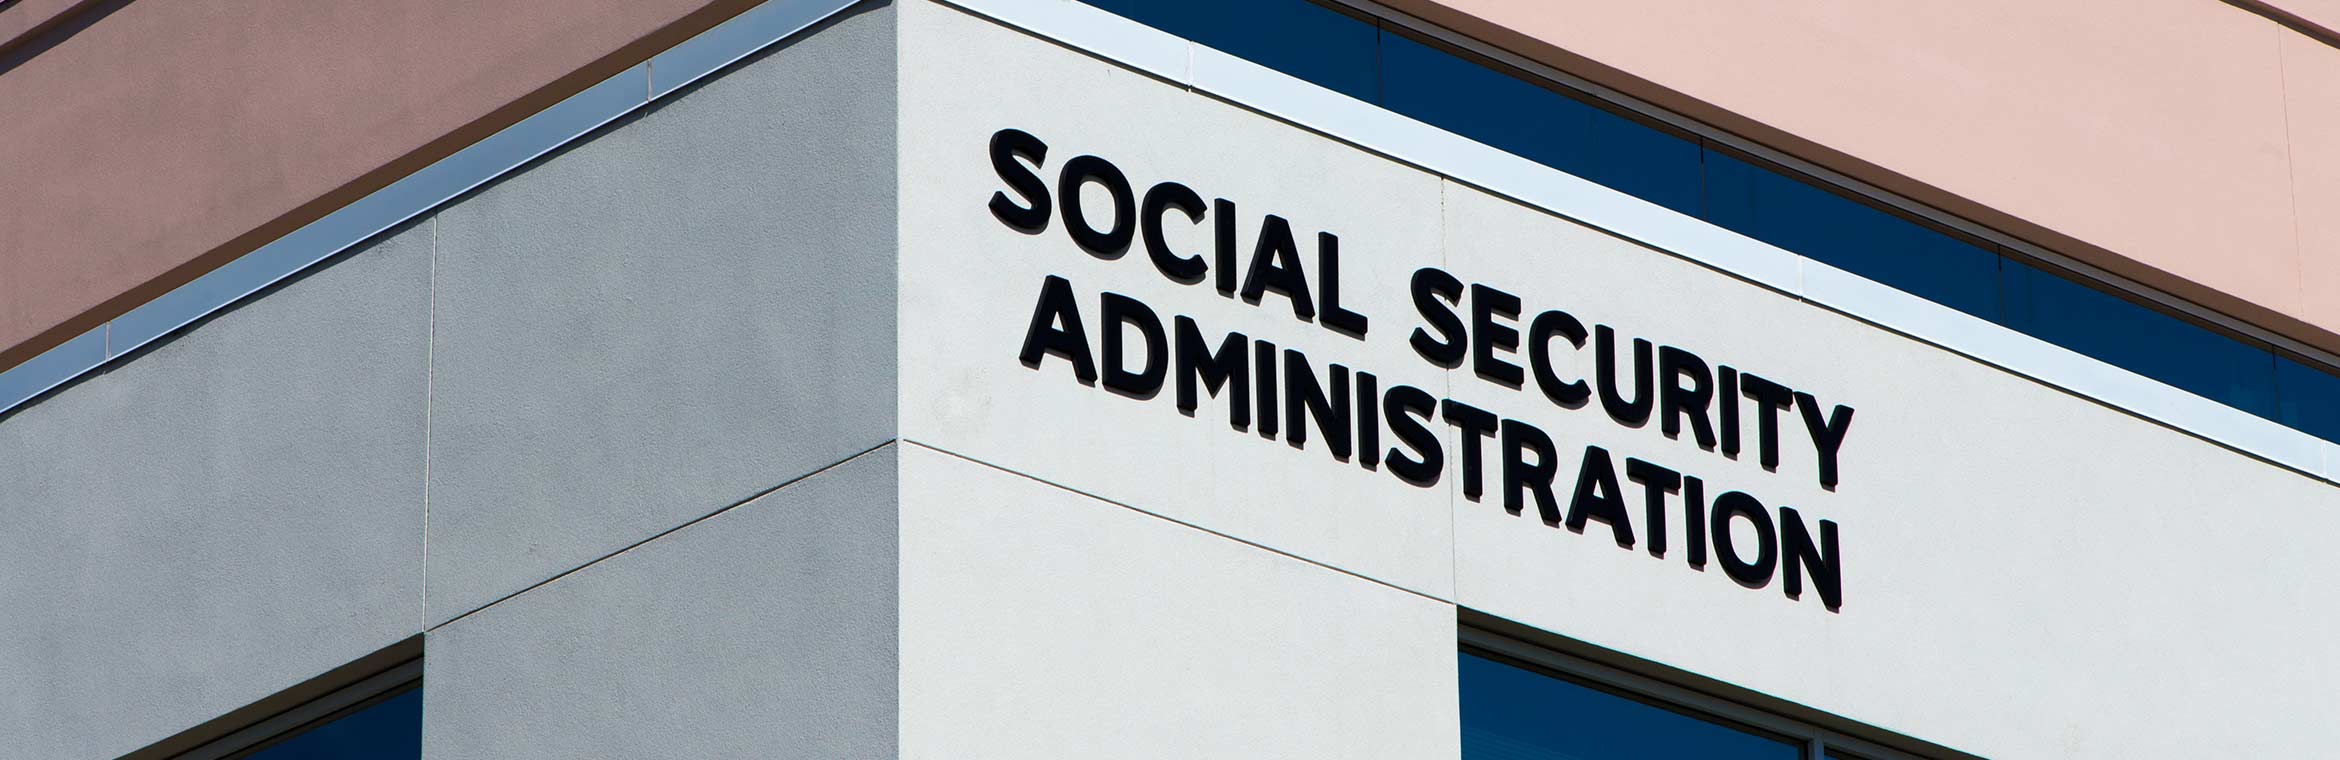 Social Security Office Serves As Medicare Office ID449 